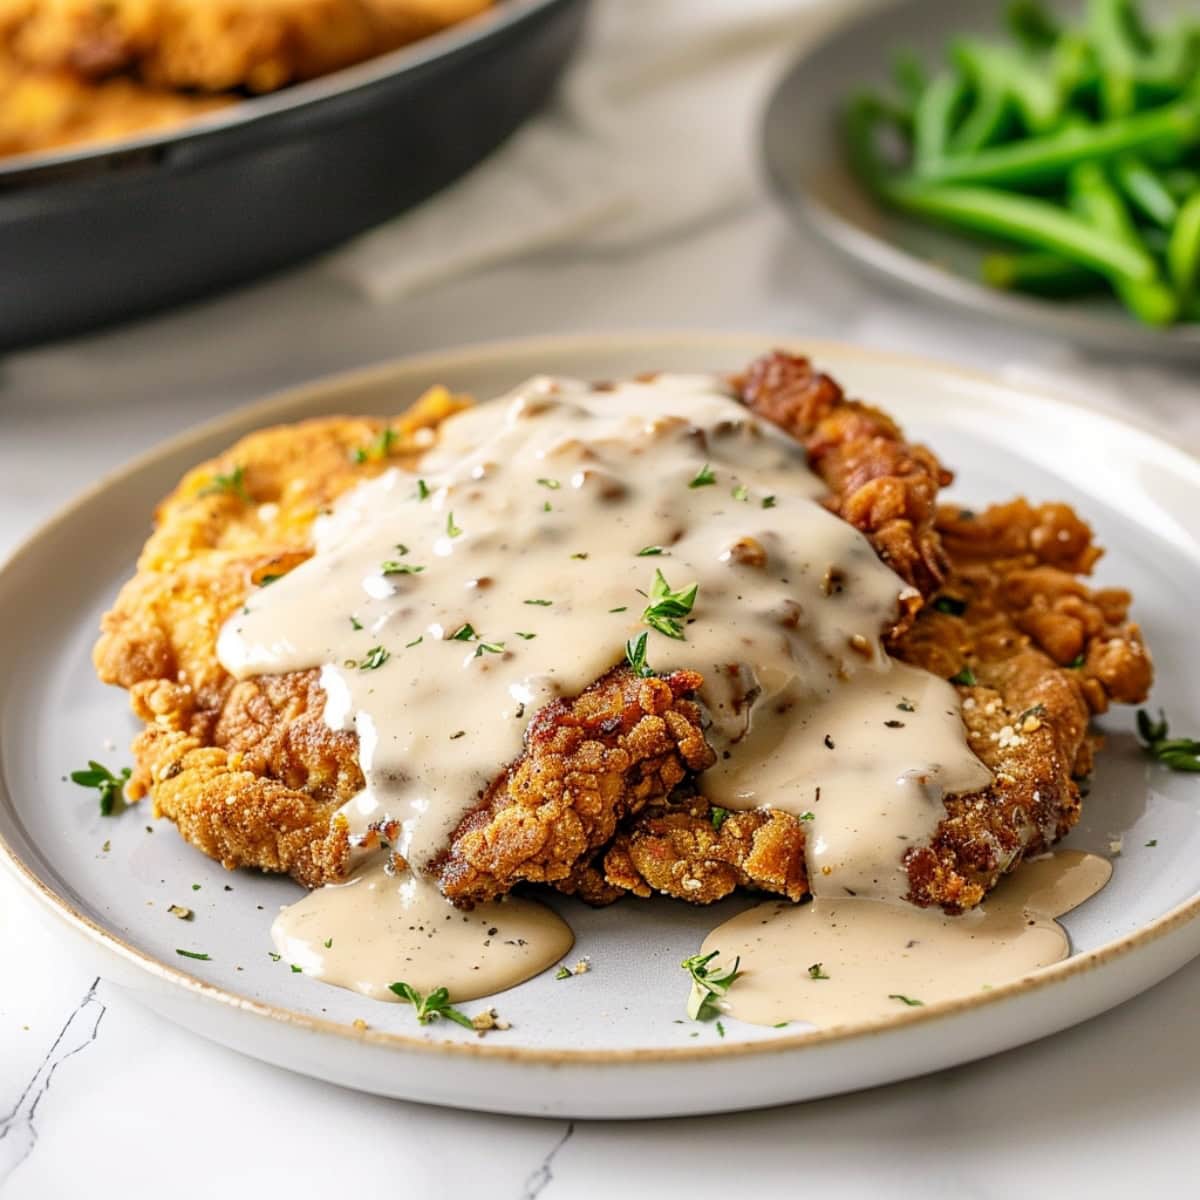 Traditional Southern-style chicken fried steak with creamy gravy.